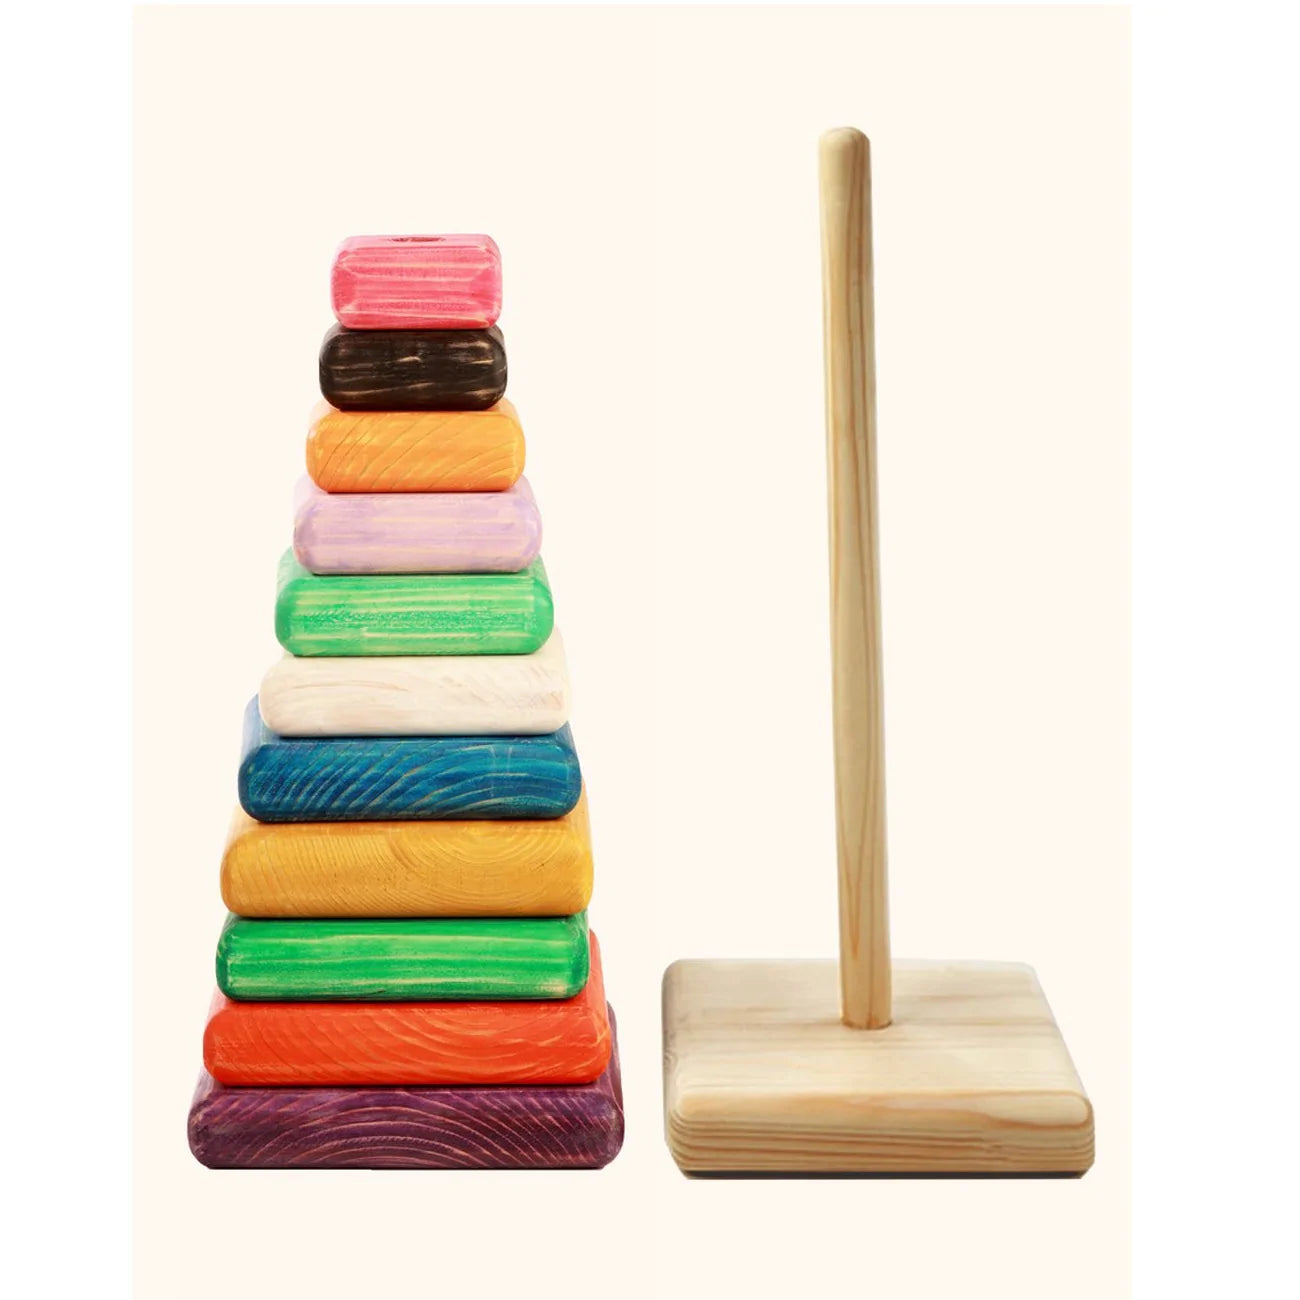 Buy Ariro Wooden Giant Stacking Toy - Coloured - SkilloToys.com